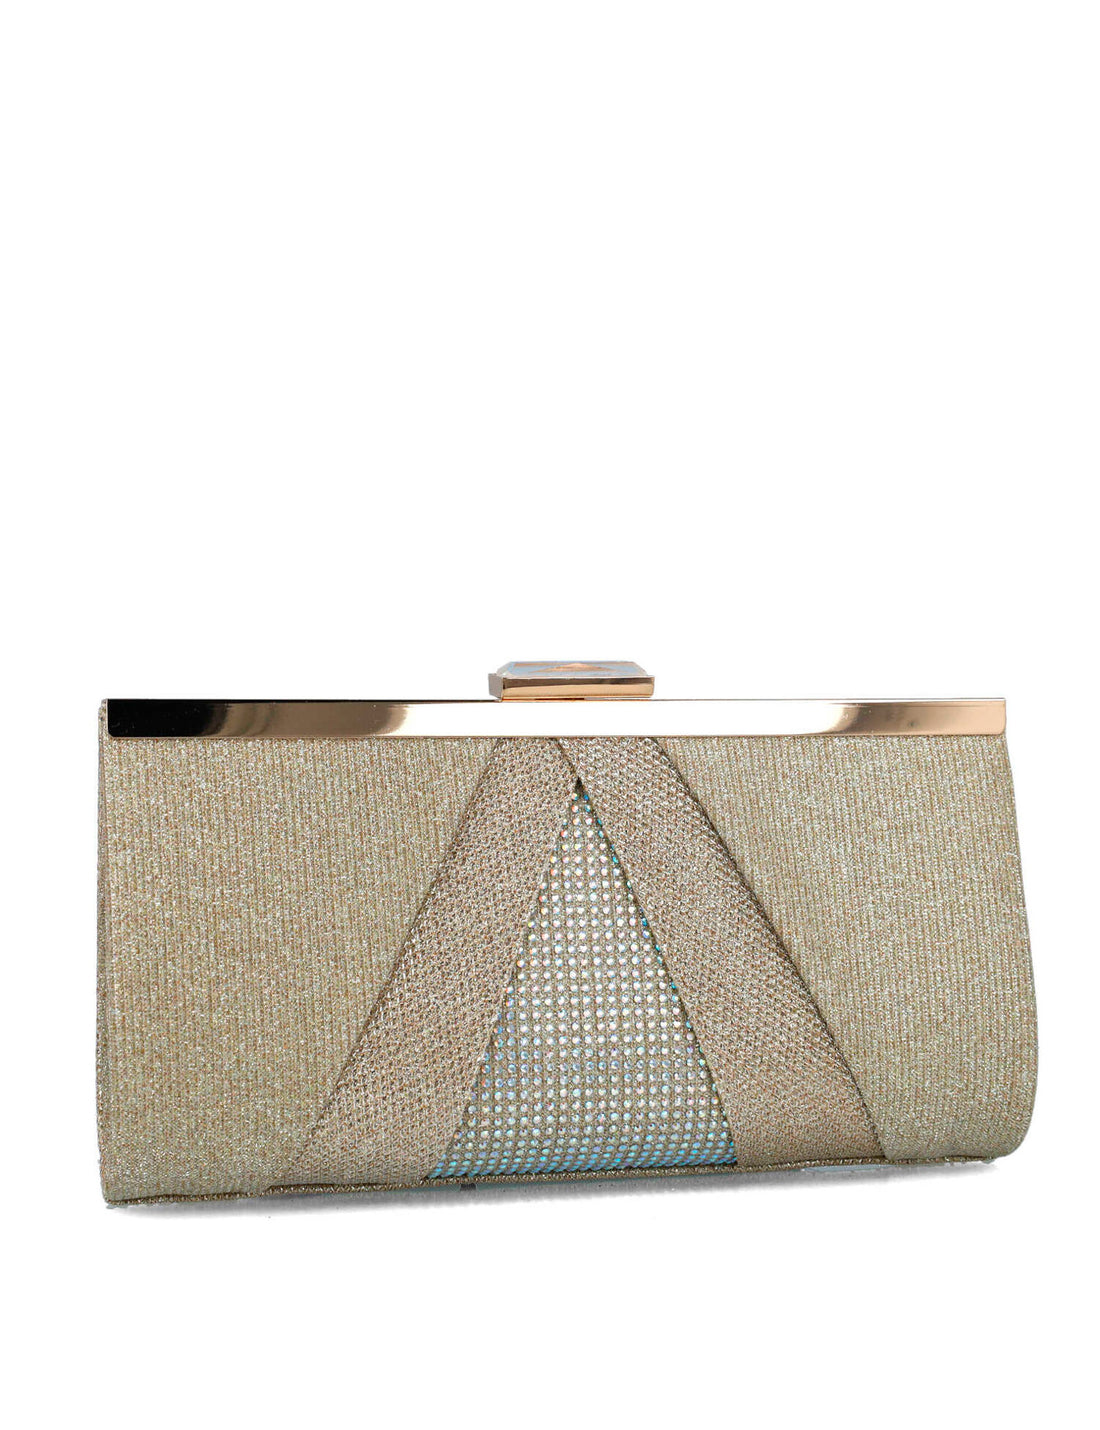 Beige Clutch With Gold Hardware_85511_00_02